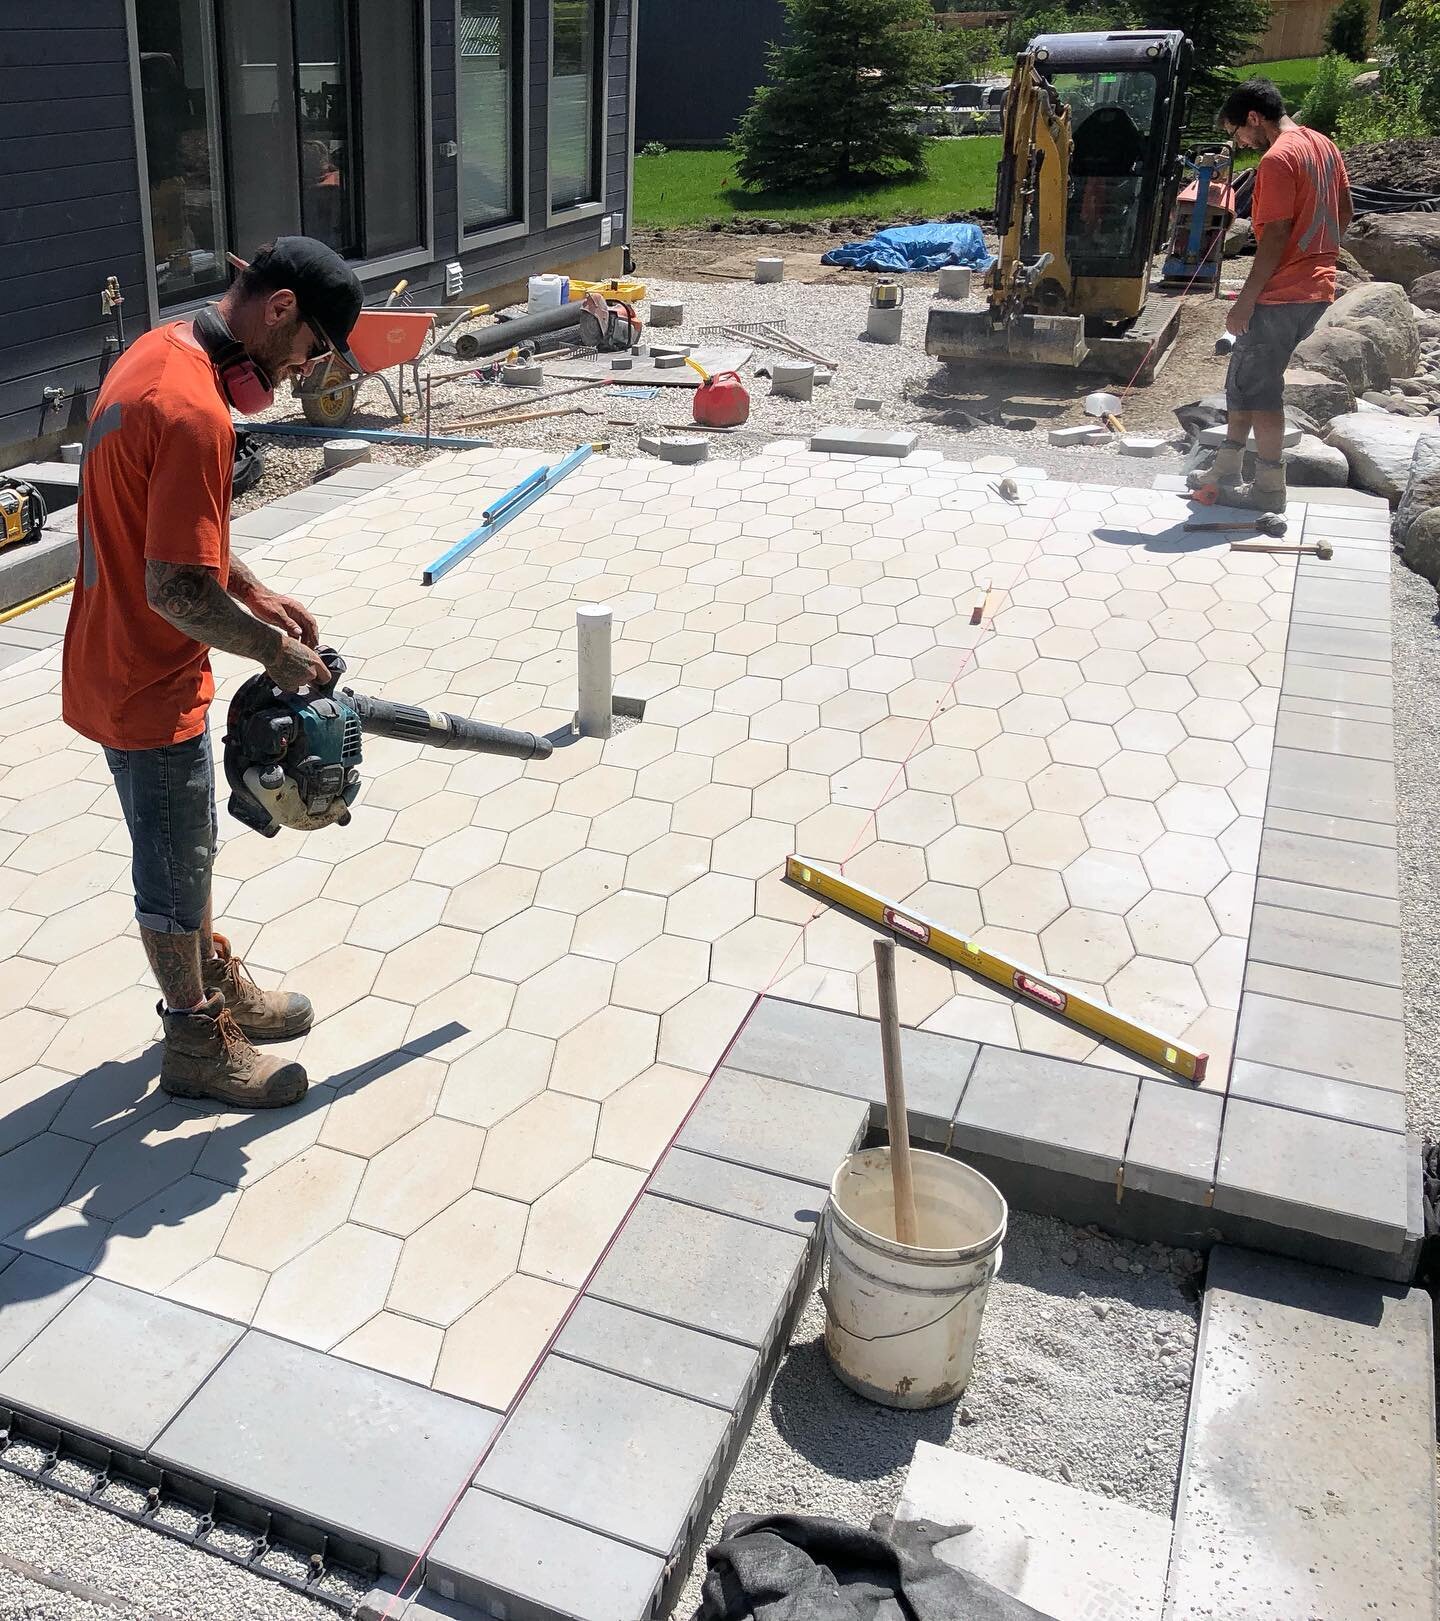 Getting some Techo down.  #hexa #honeycomb #highdefinition #funky #patiodesign #smoothasconcrete #inspiringartscapes #techobloc